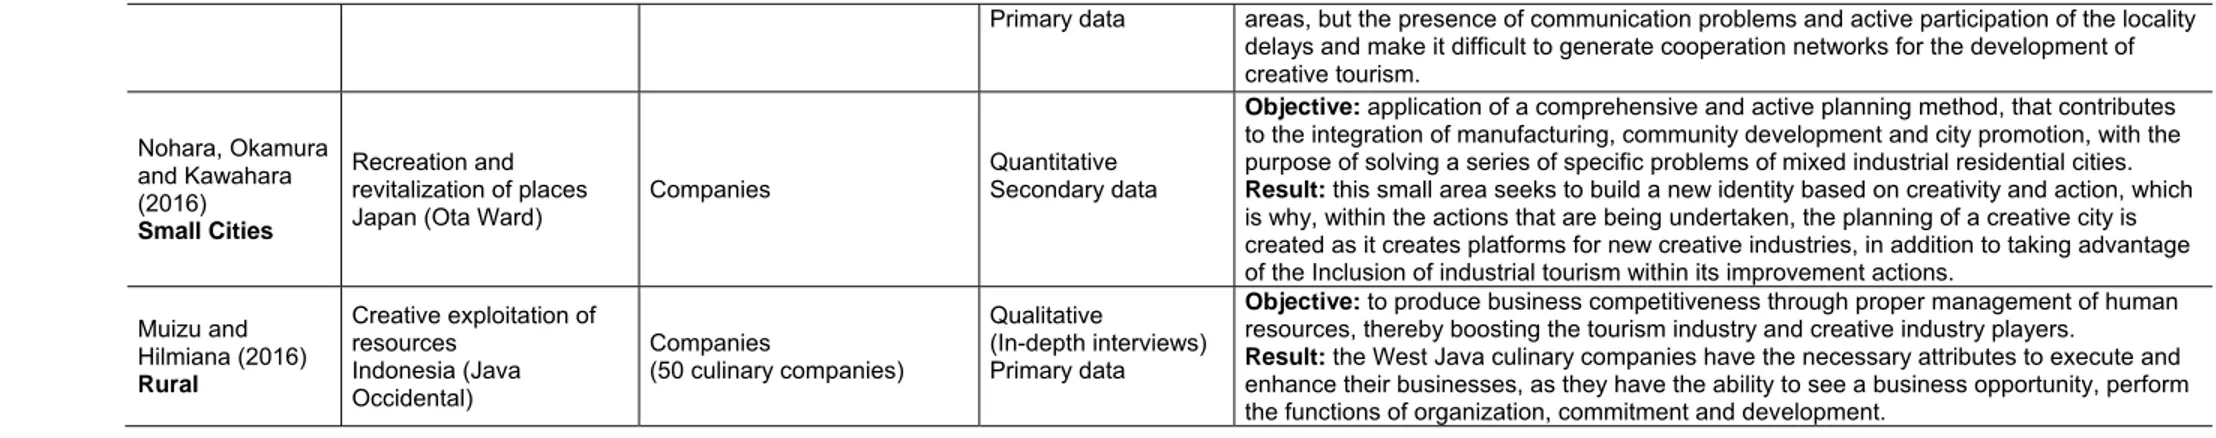 Table 7: Matrix of content analysis  Source: Own elaboration 